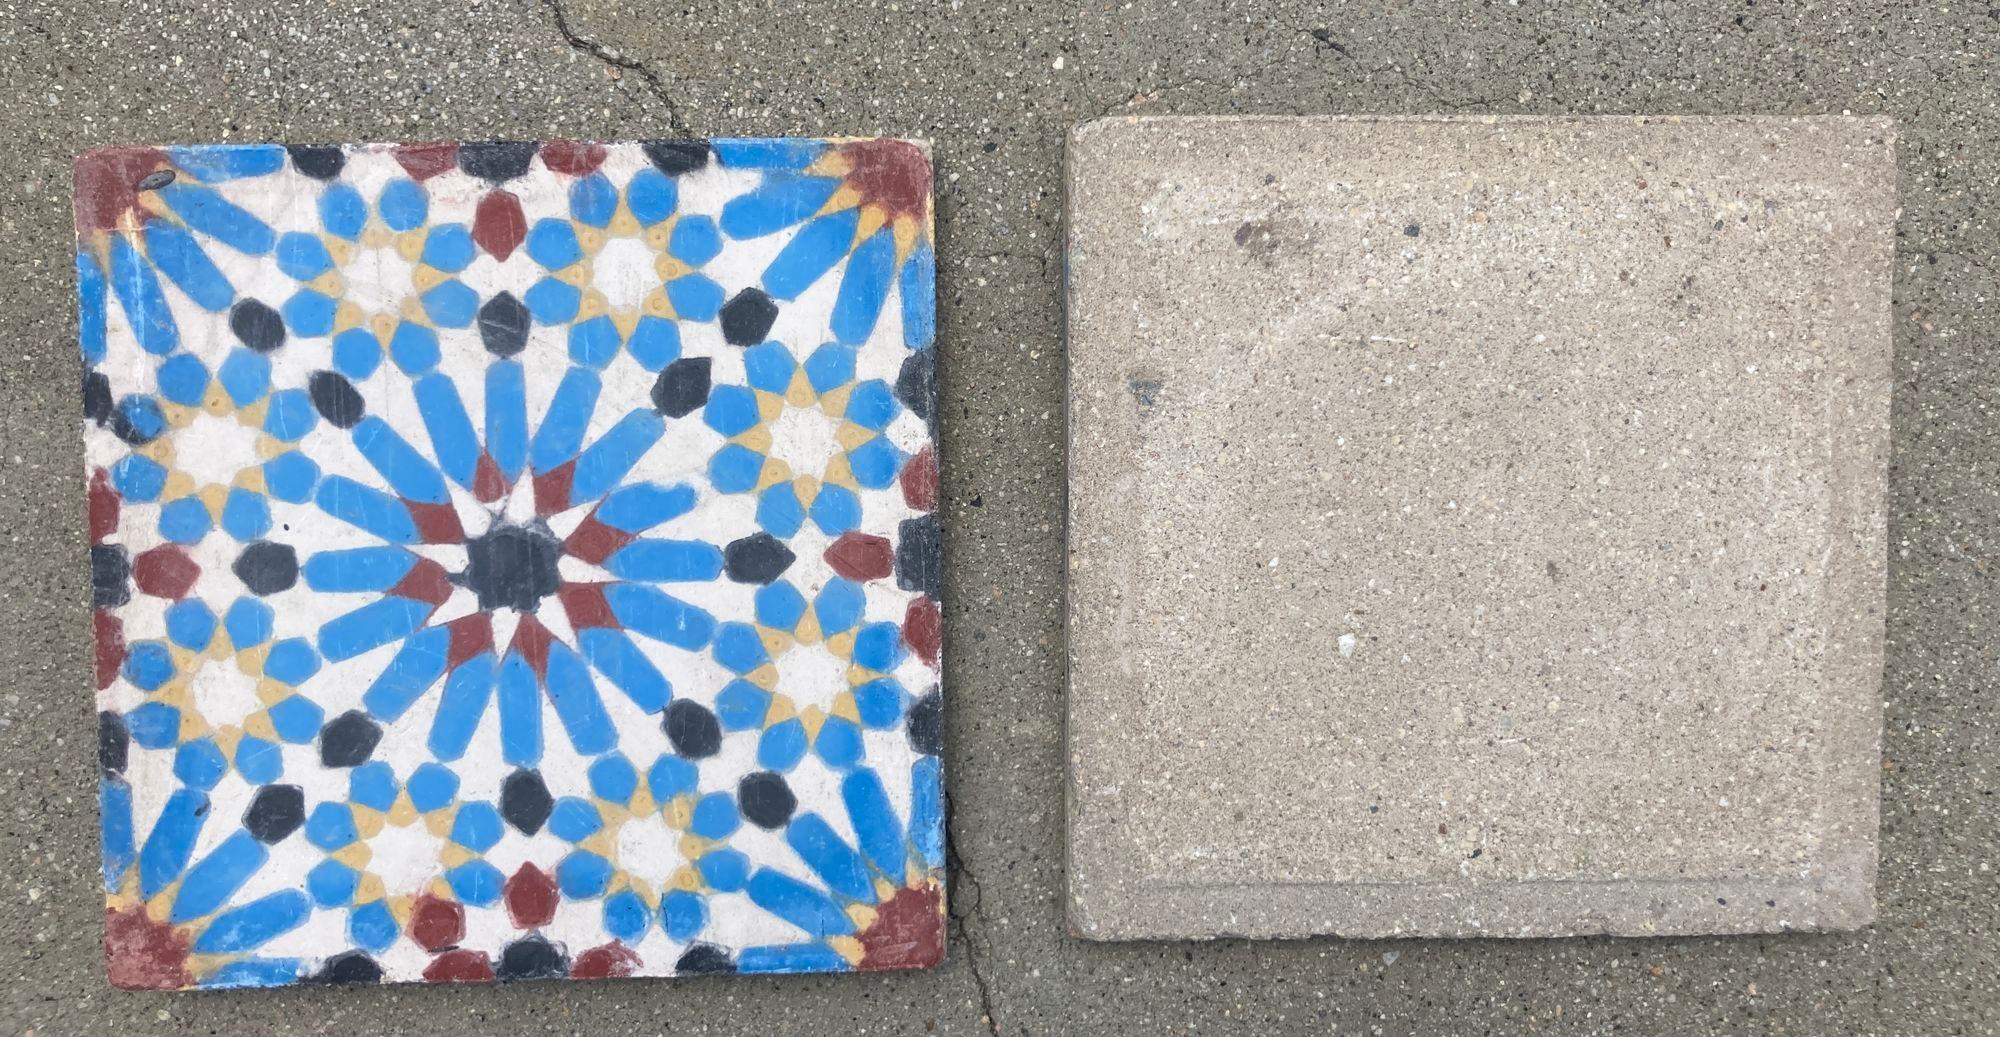 Moroccan Encaustic Cement Tile Border with Moorish Fez Design.
Moroccan handcrafted and hand painted cement tiles with traditional Moorish color.
These are authentic Moroccan reclaimed encaustic tiles handmade by artisans in Fez Morocco.
This is